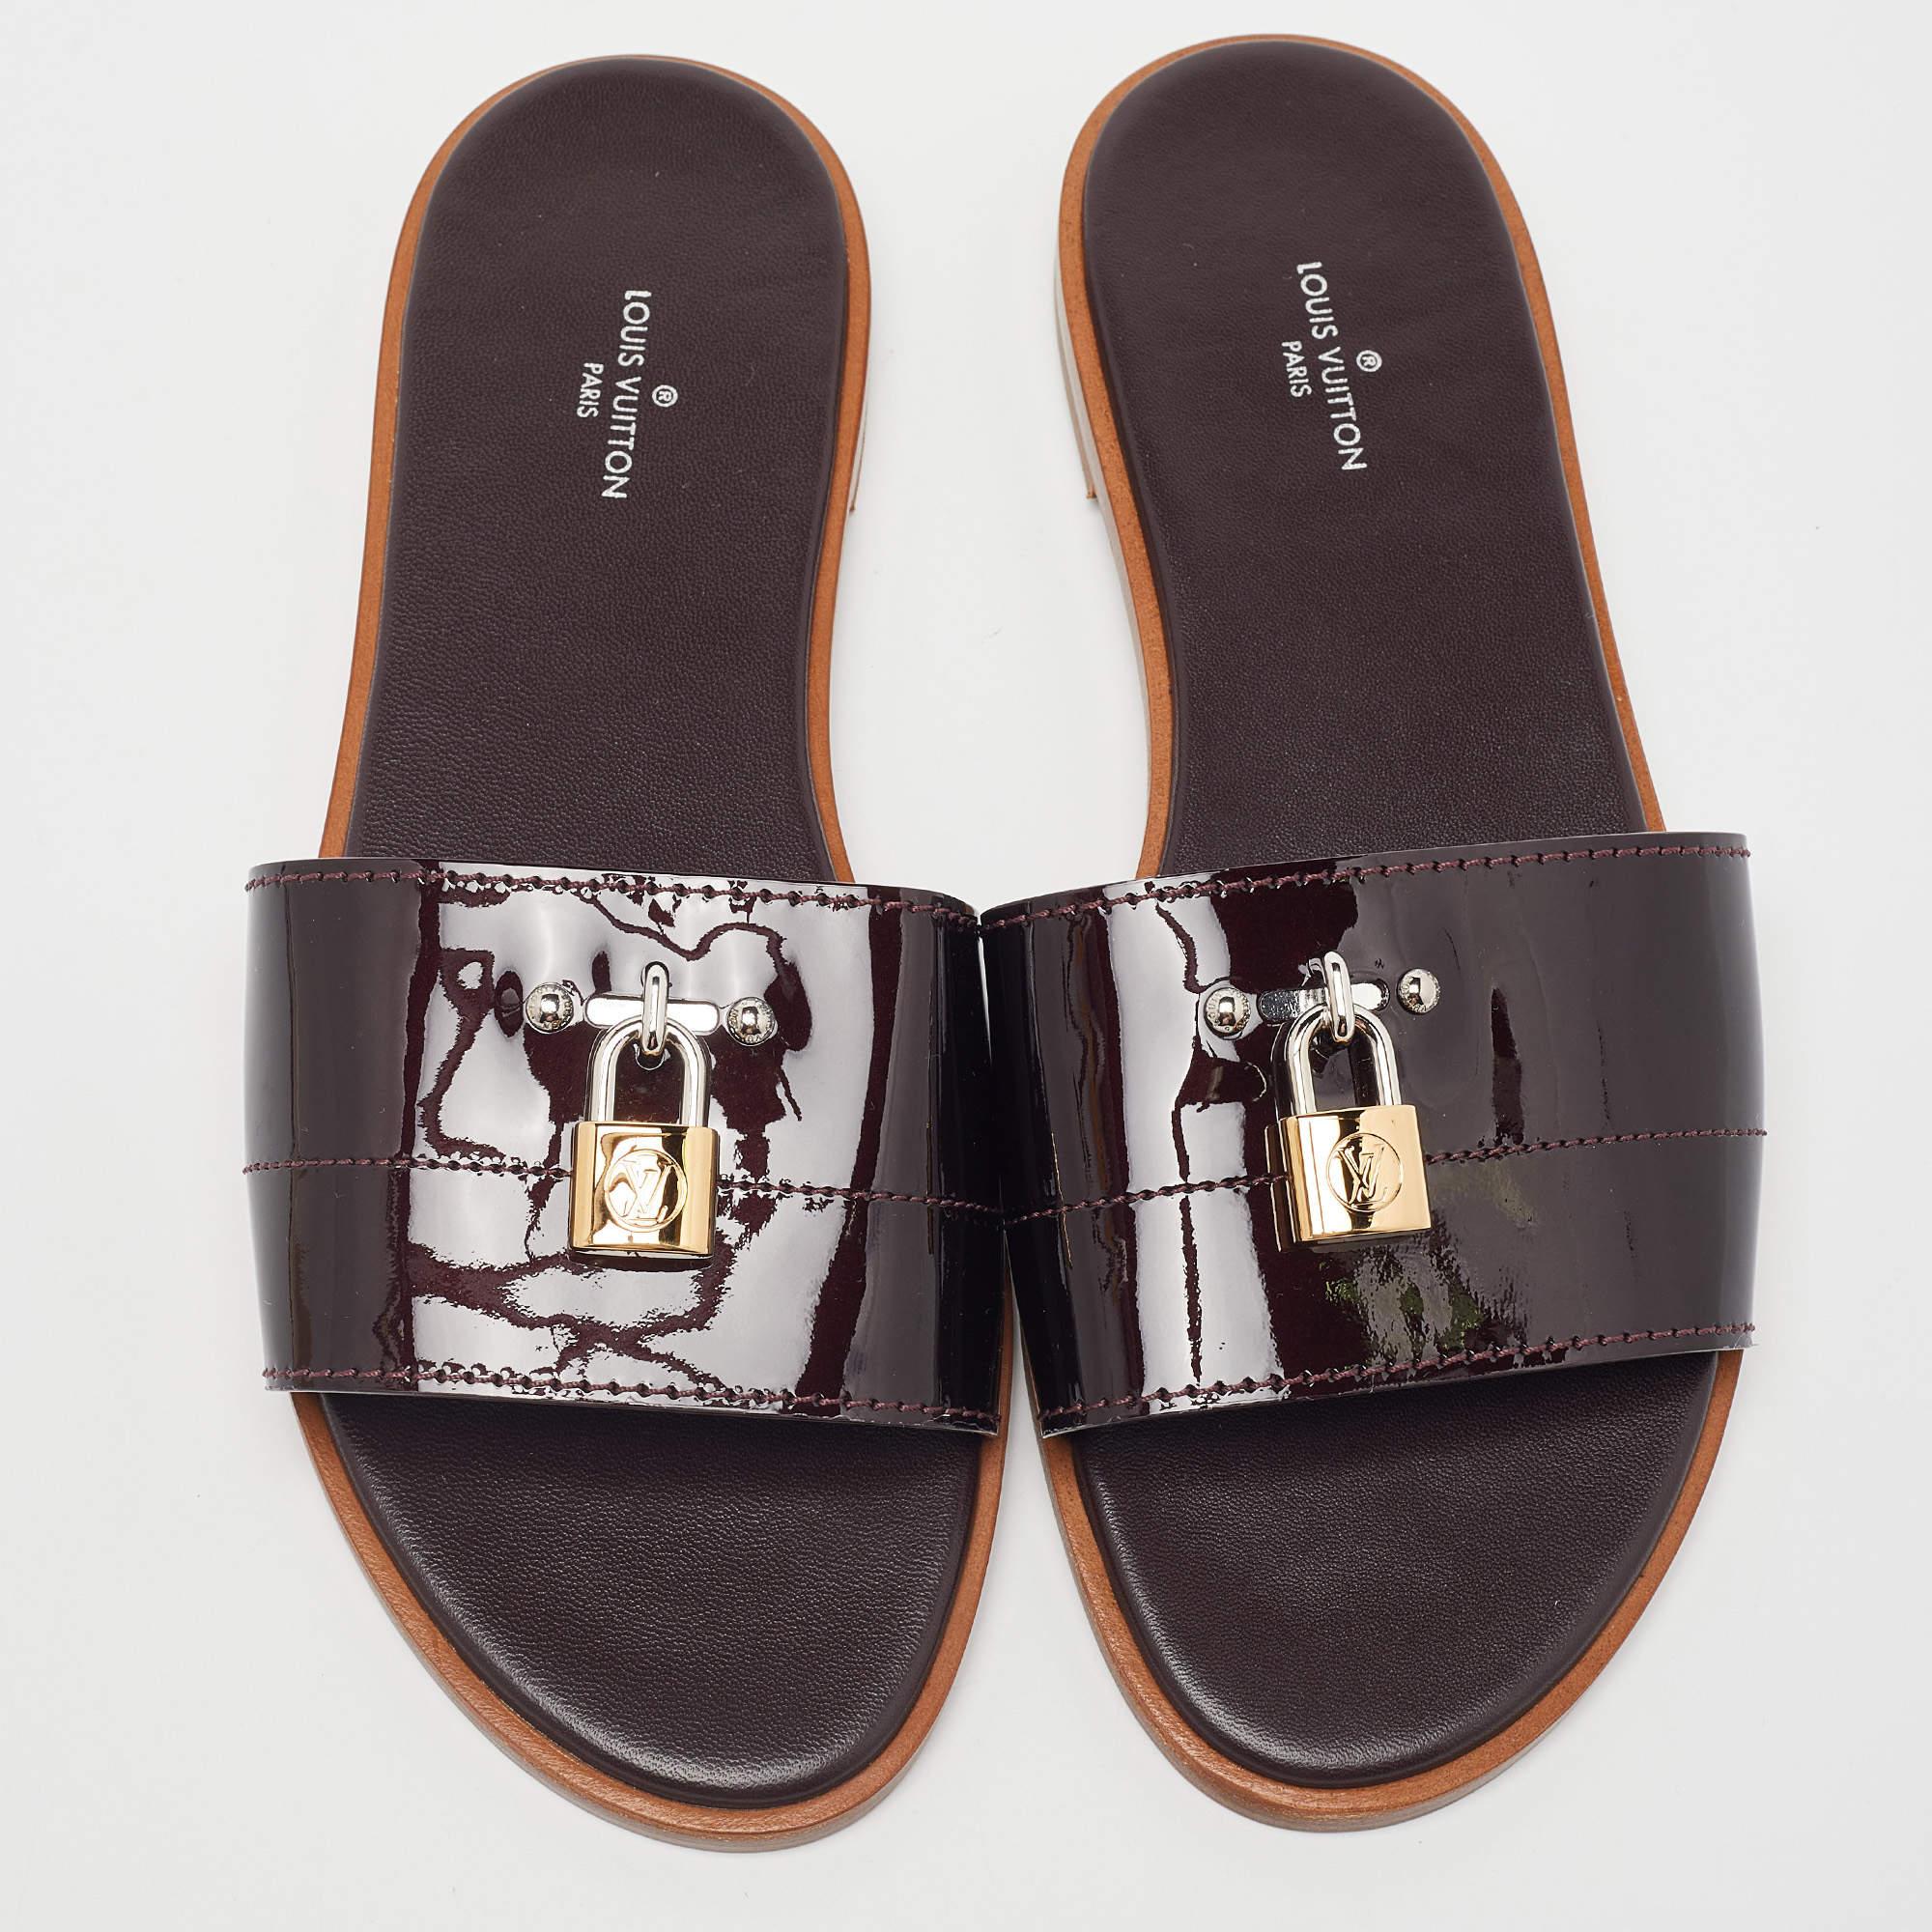 Timelessly elegant and stylish, Louis Vuitton's collections capture the effortless, nonchalant finesse of the modern woman. Crafted from patent leather, these chic Lock It sandals feature open toes and padlock accents.

Includes: Original Dustbag

